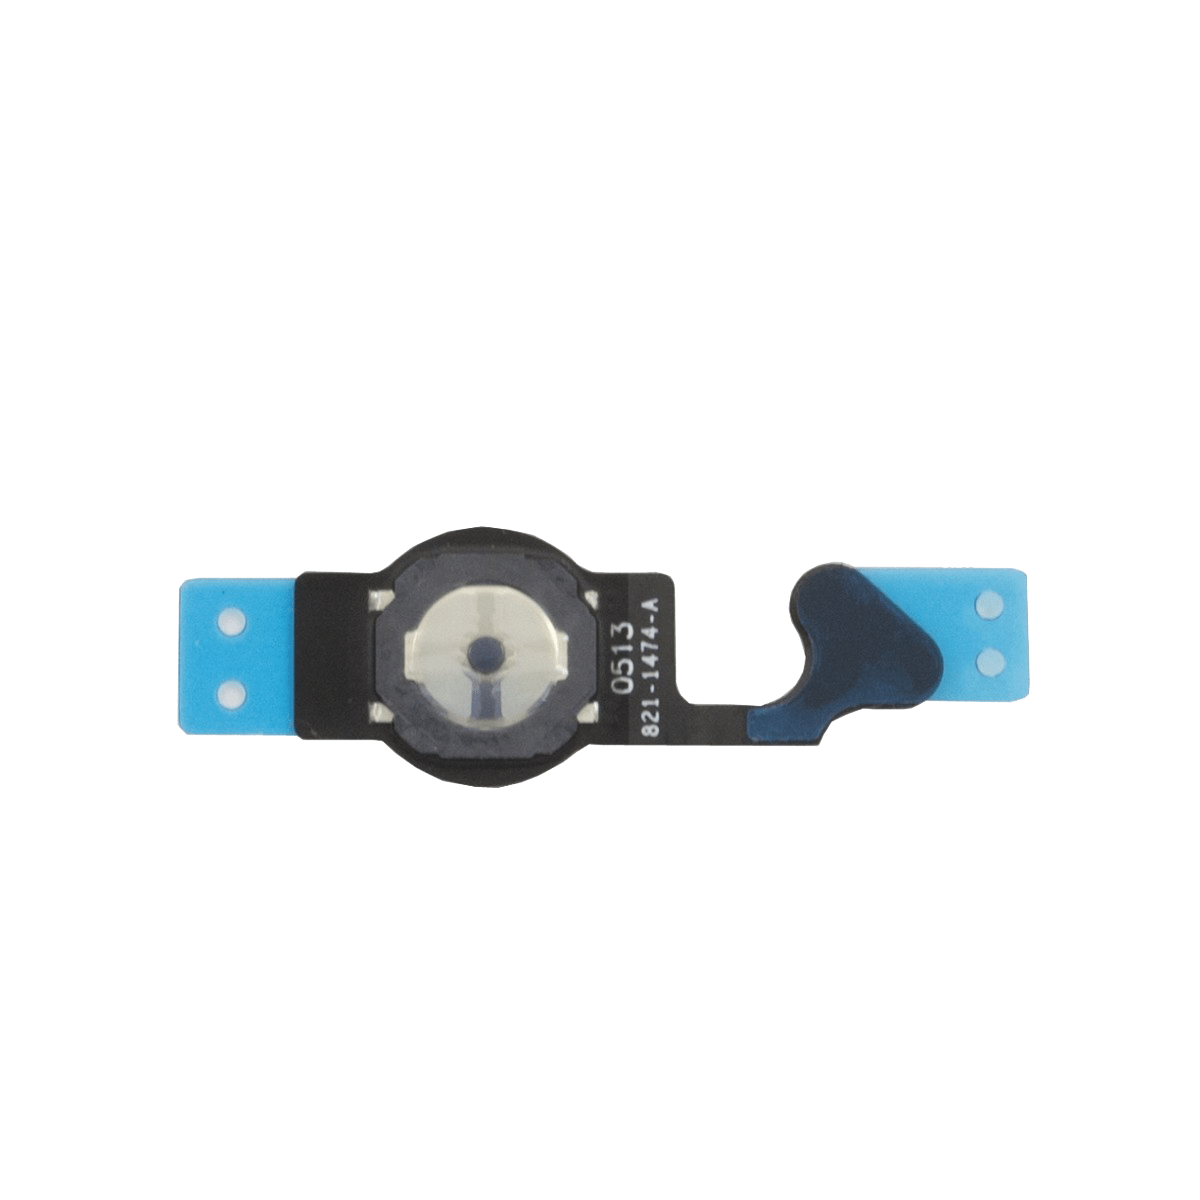 iPhone 5 Home Button Flex Cable Replacement